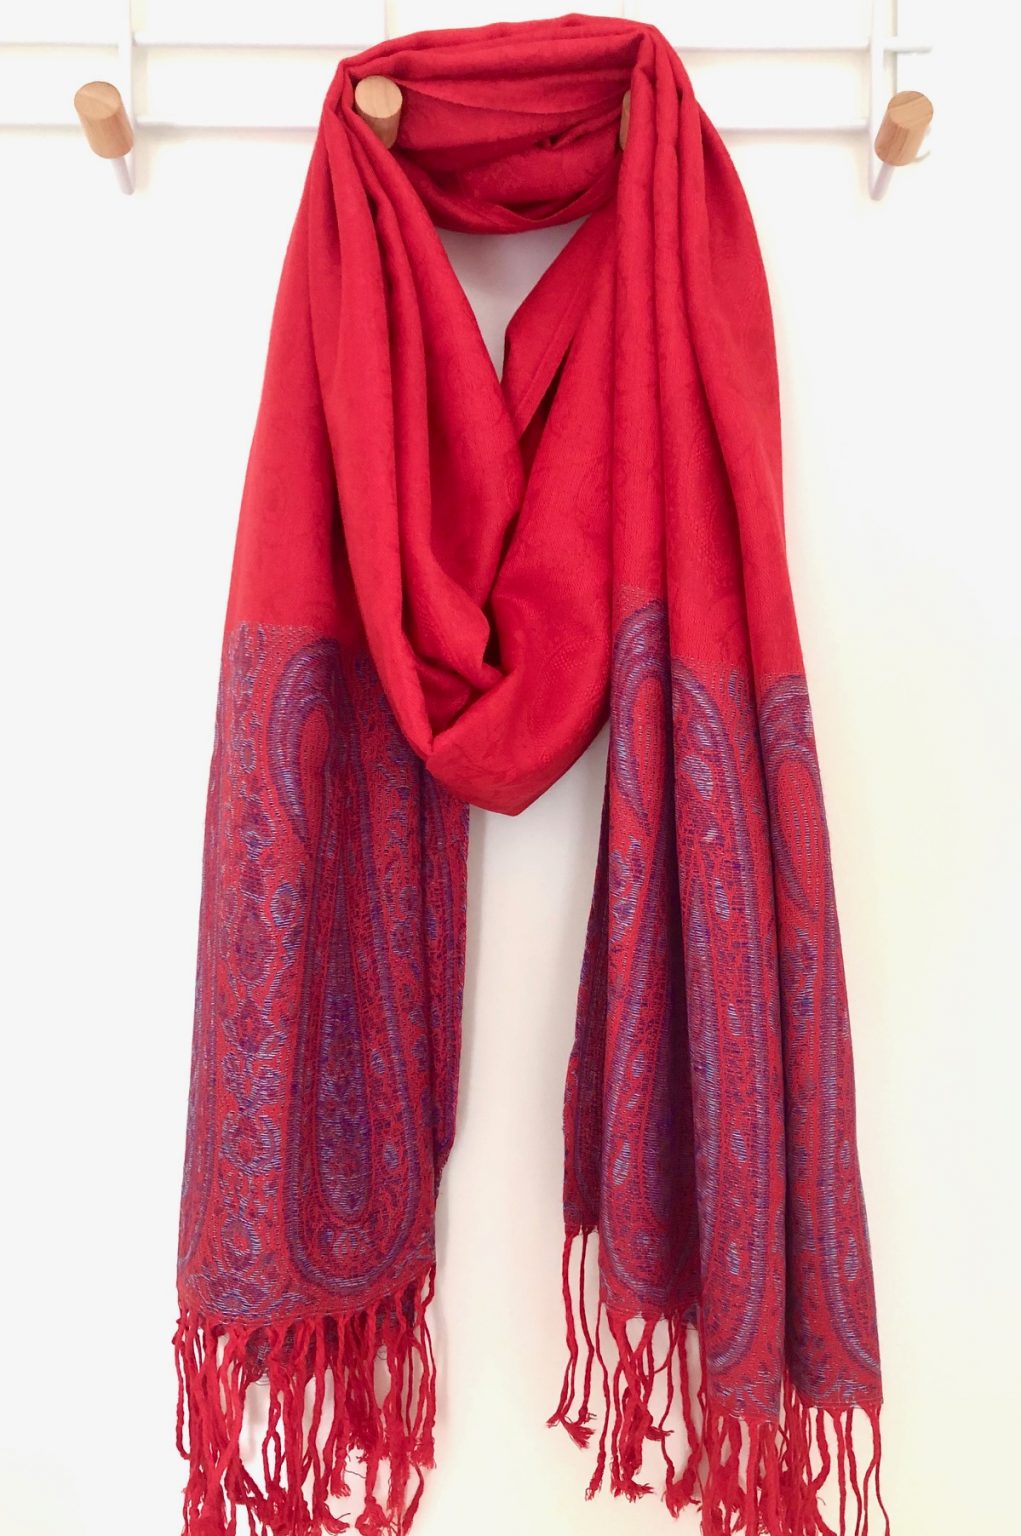 Thai Cashmere Scarf - Red - Just Landed in the Grove